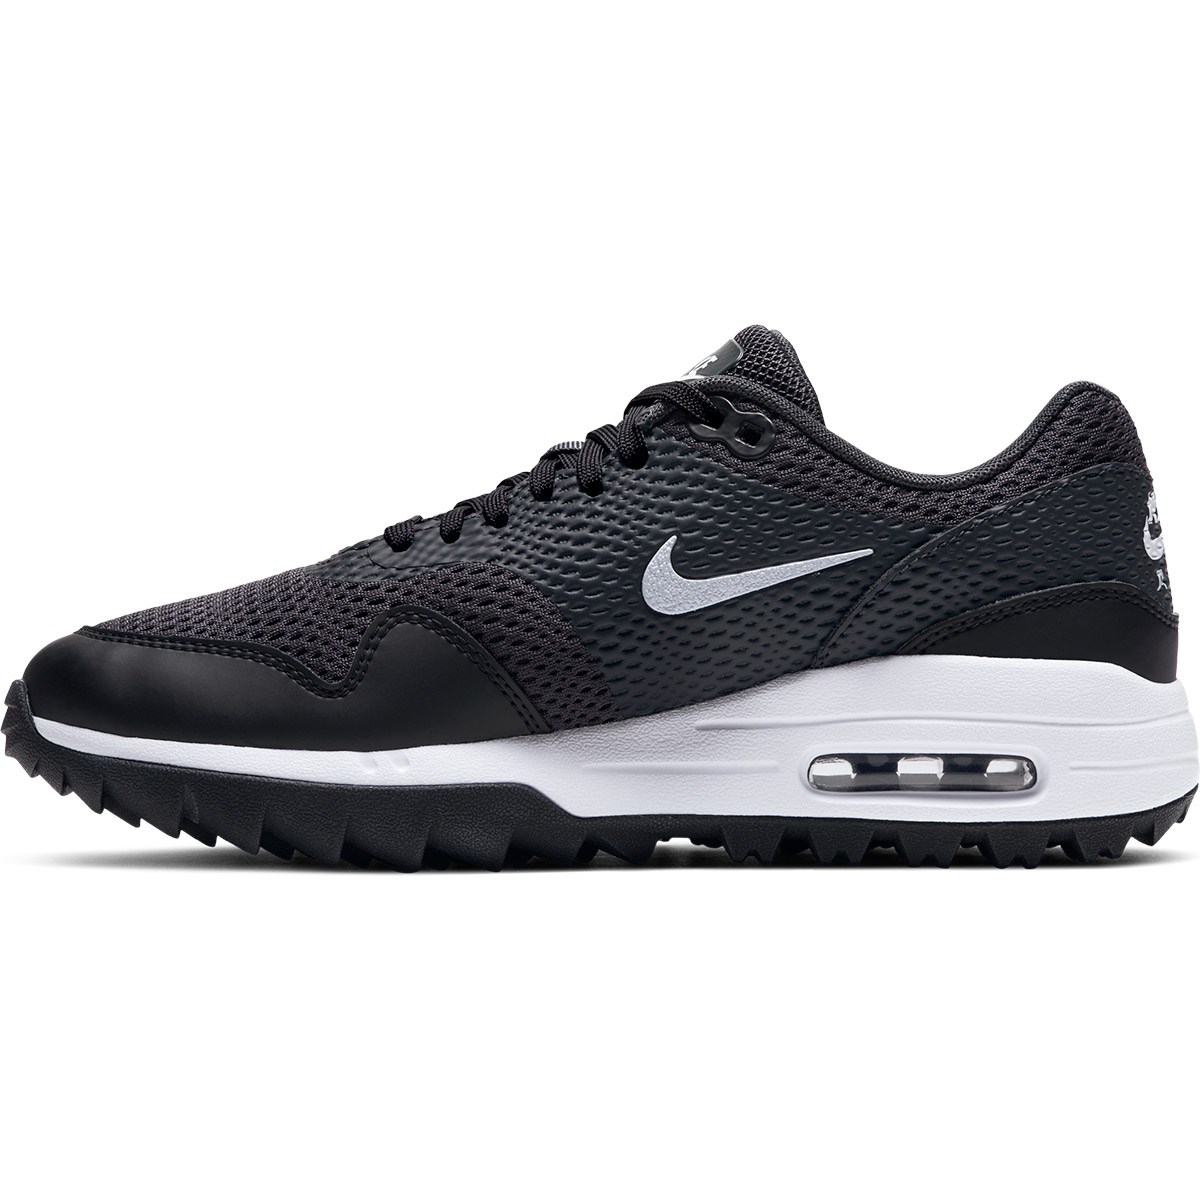 Nike Golf Air Max 1G Ladies Shoes 2020 from american golf